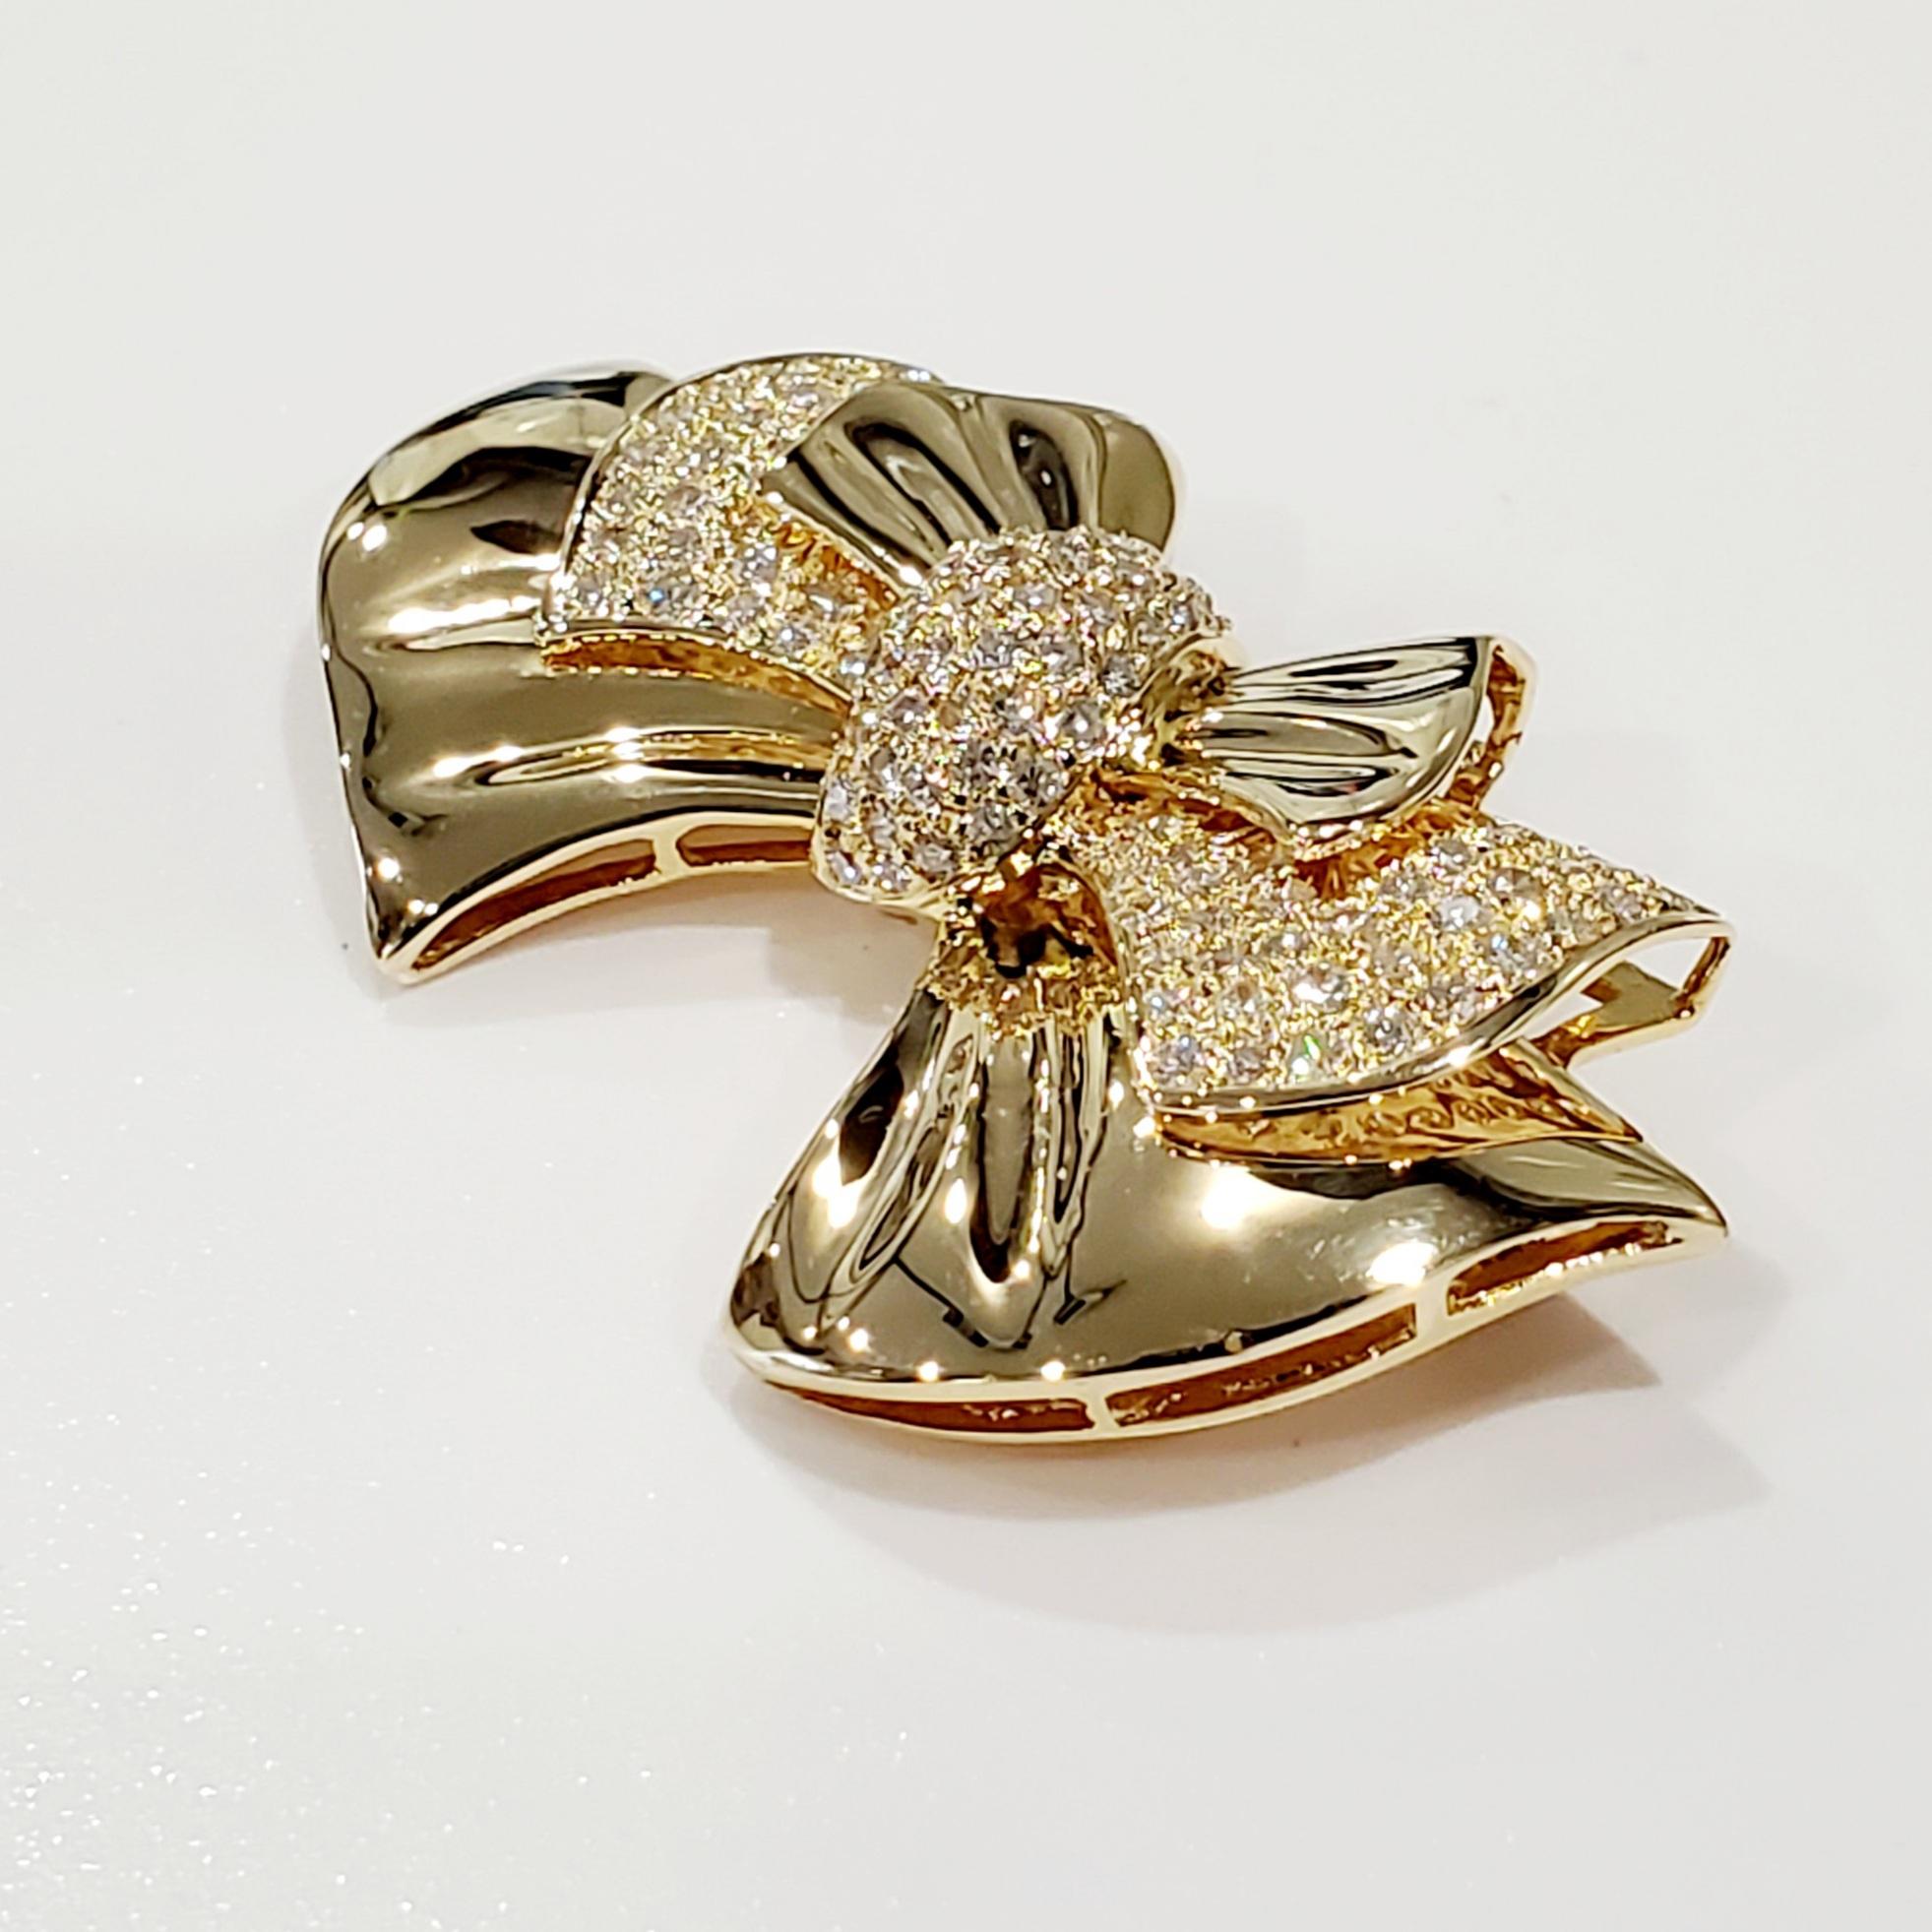 Beautiful 18kt yellow gold bow design pin with pave set round brilliant diamond of approximately 2.00 cttw. The diamonds are f/g in color and si/vs in clarity.
The pin is 50mm wide and 30mm length, stamped 18kt, and weighs 16.7 grams. This pin makes